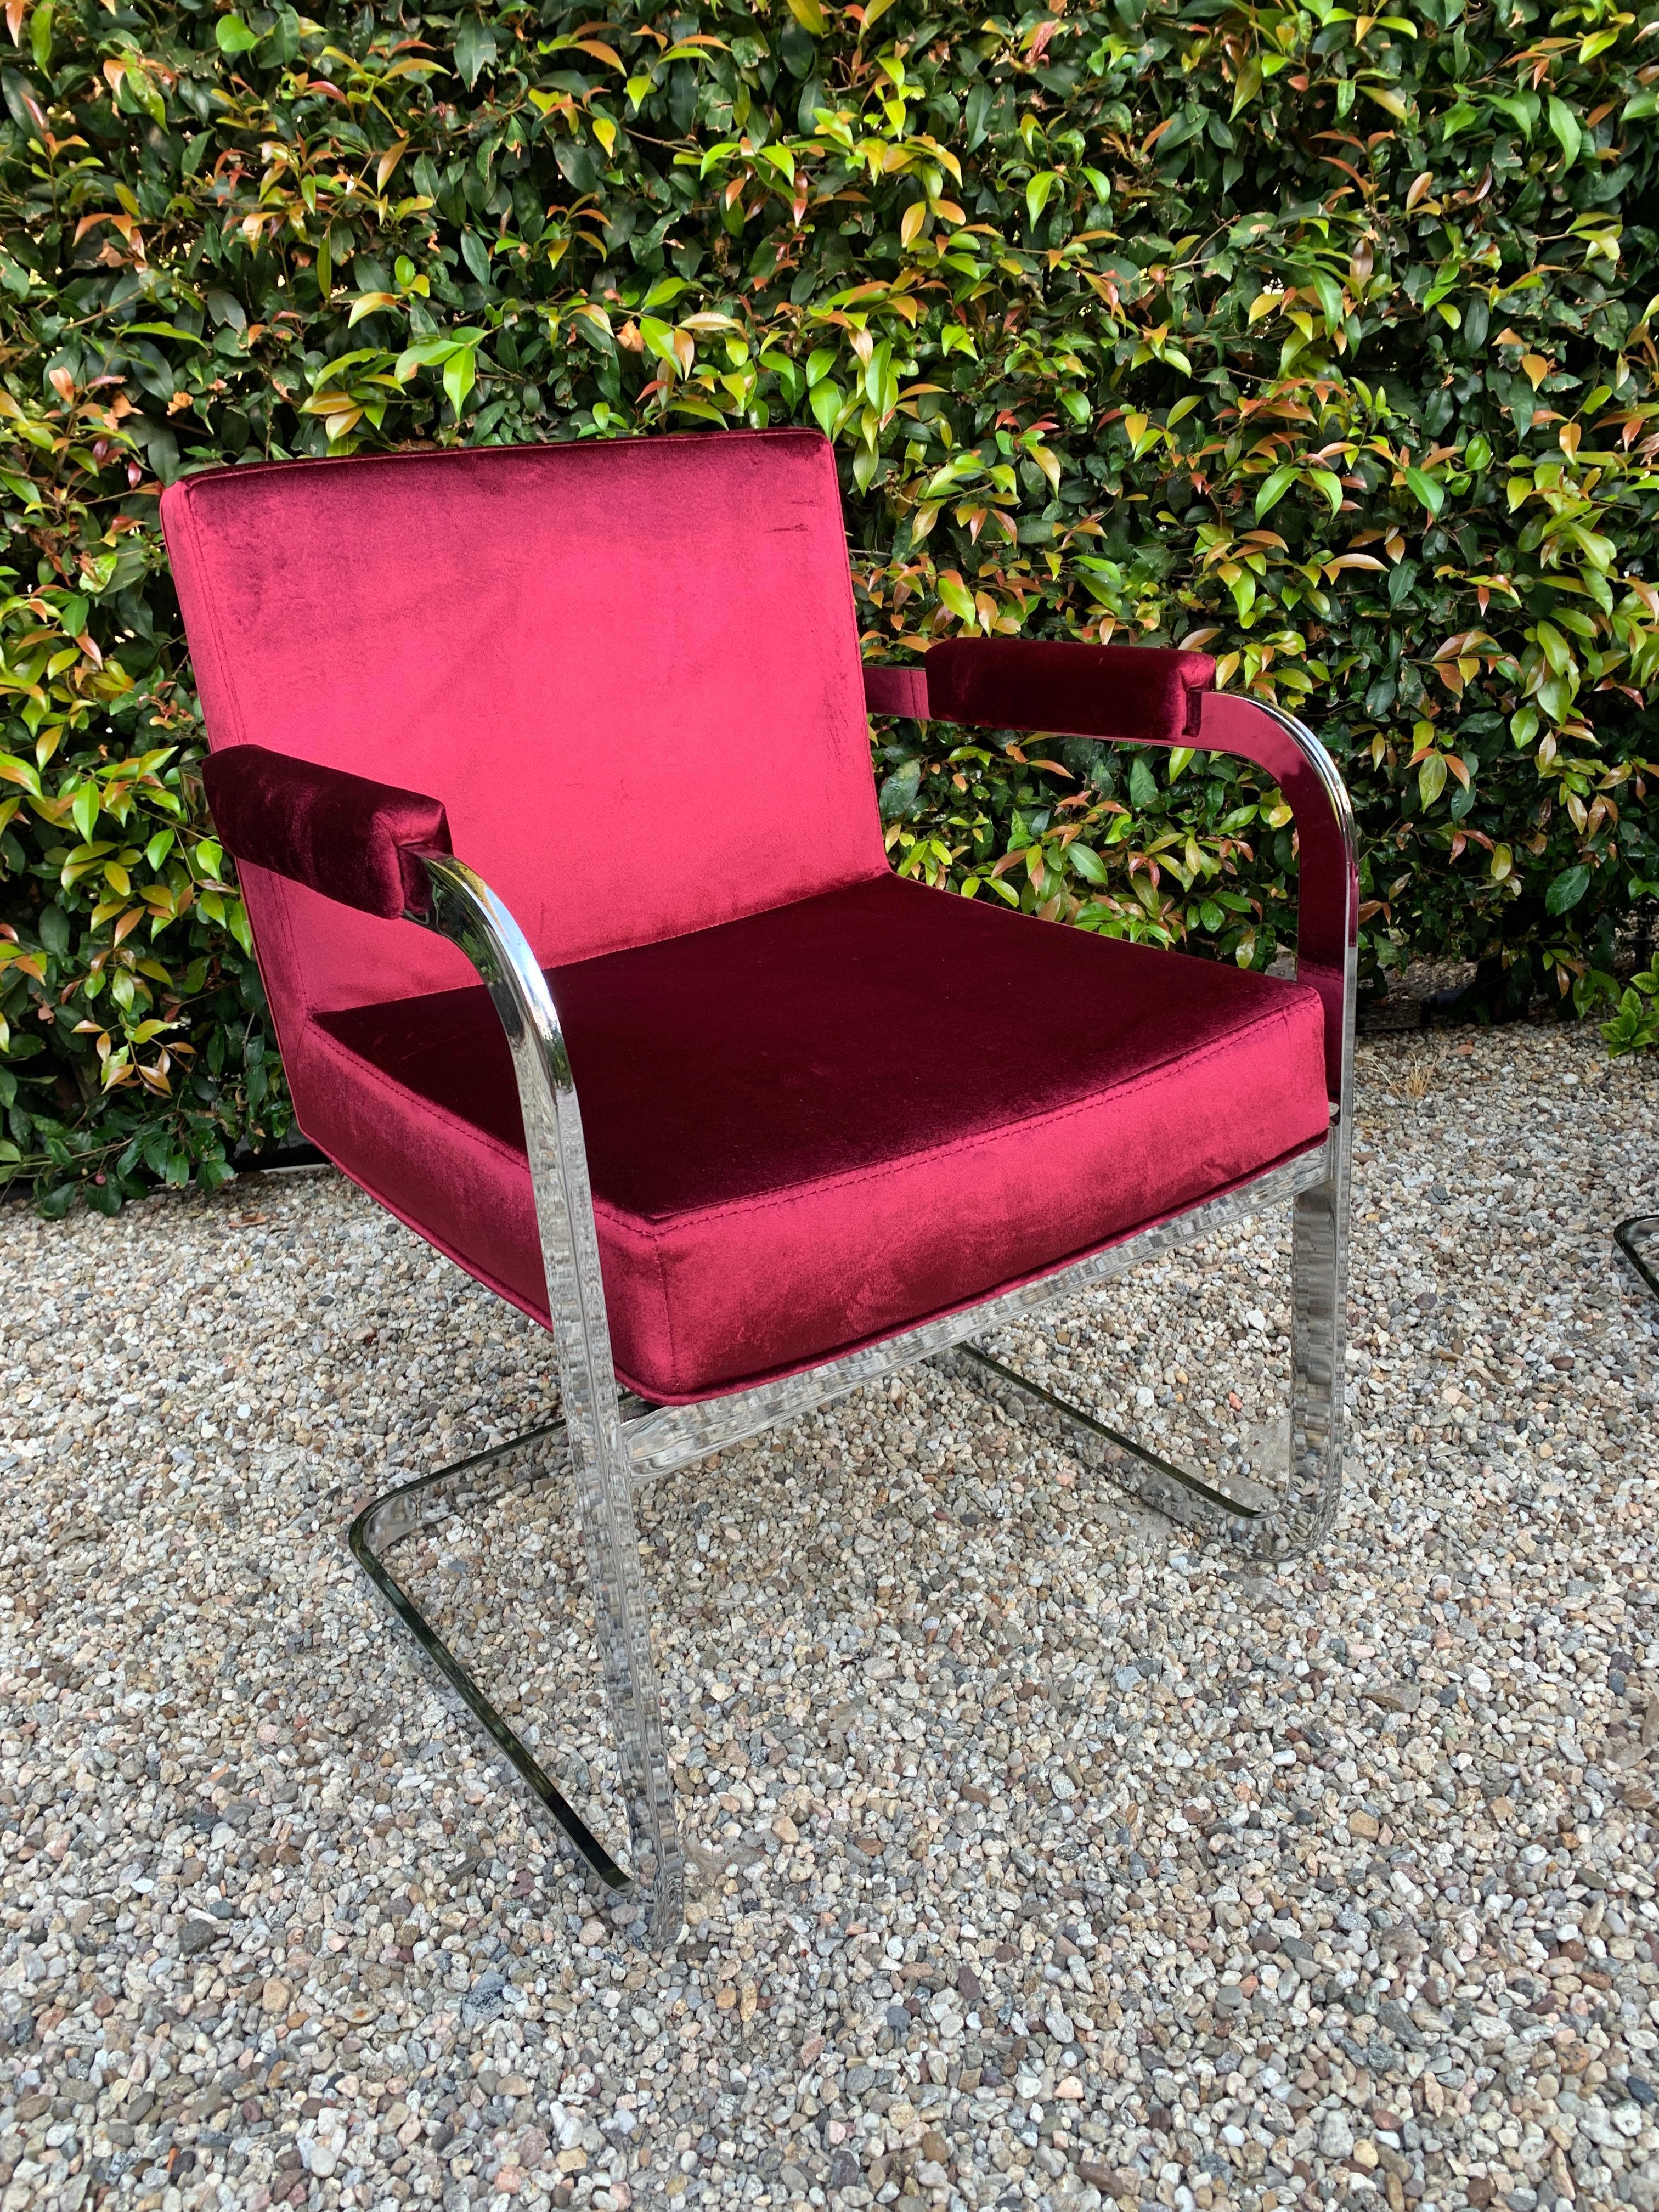 Polished Set of Four Milo Baughman for Thayer Coggin Upholstered Chrome Chairs For Sale